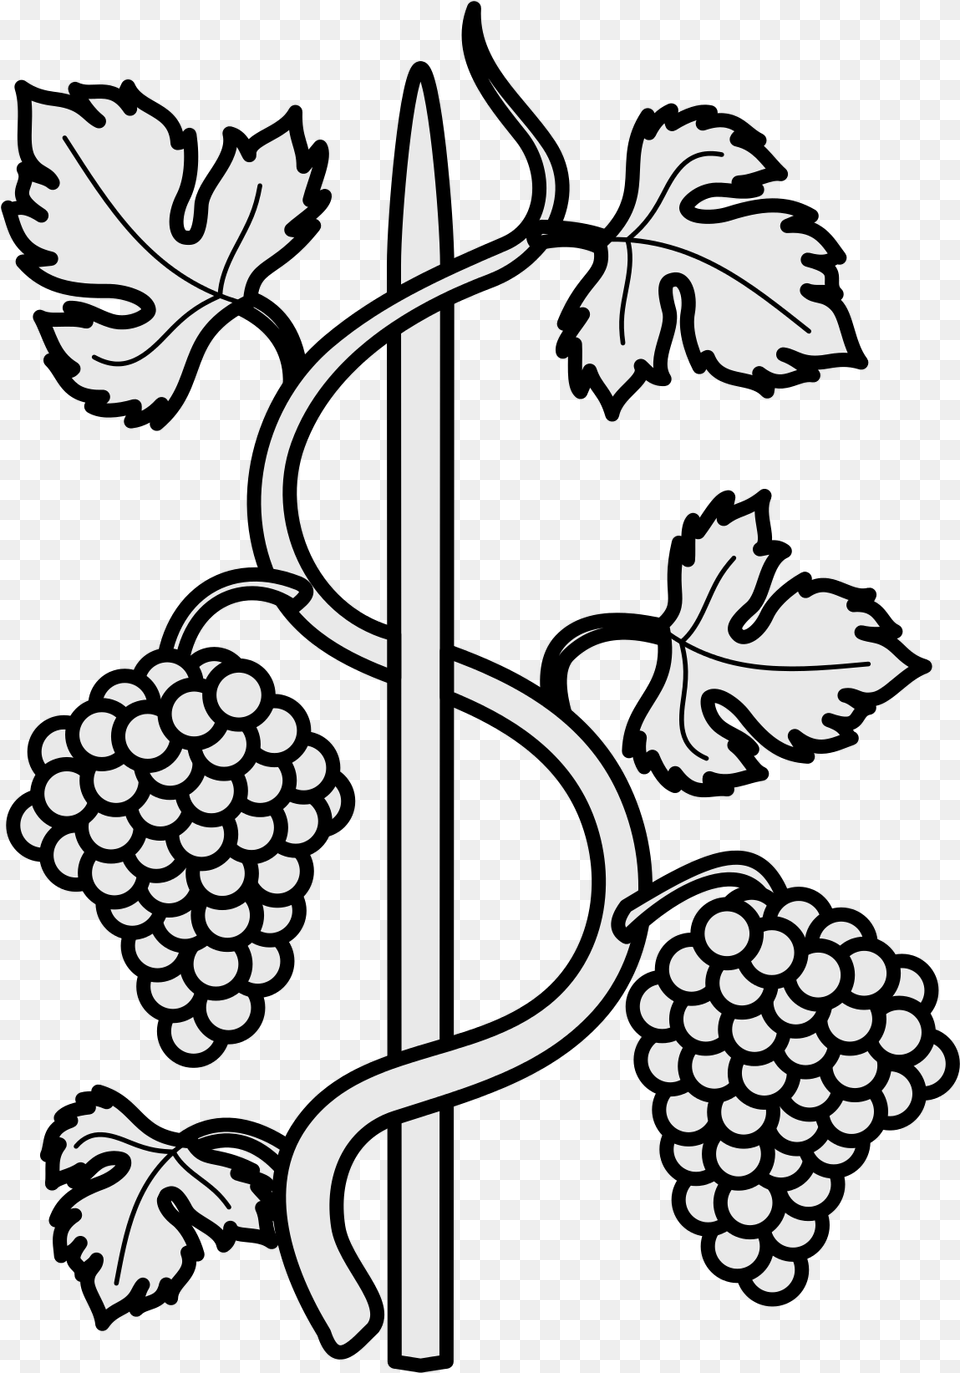 File Coa Illustration Elements Grapevine Coat Of Arms, Stencil, Produce, Plant, Food Png